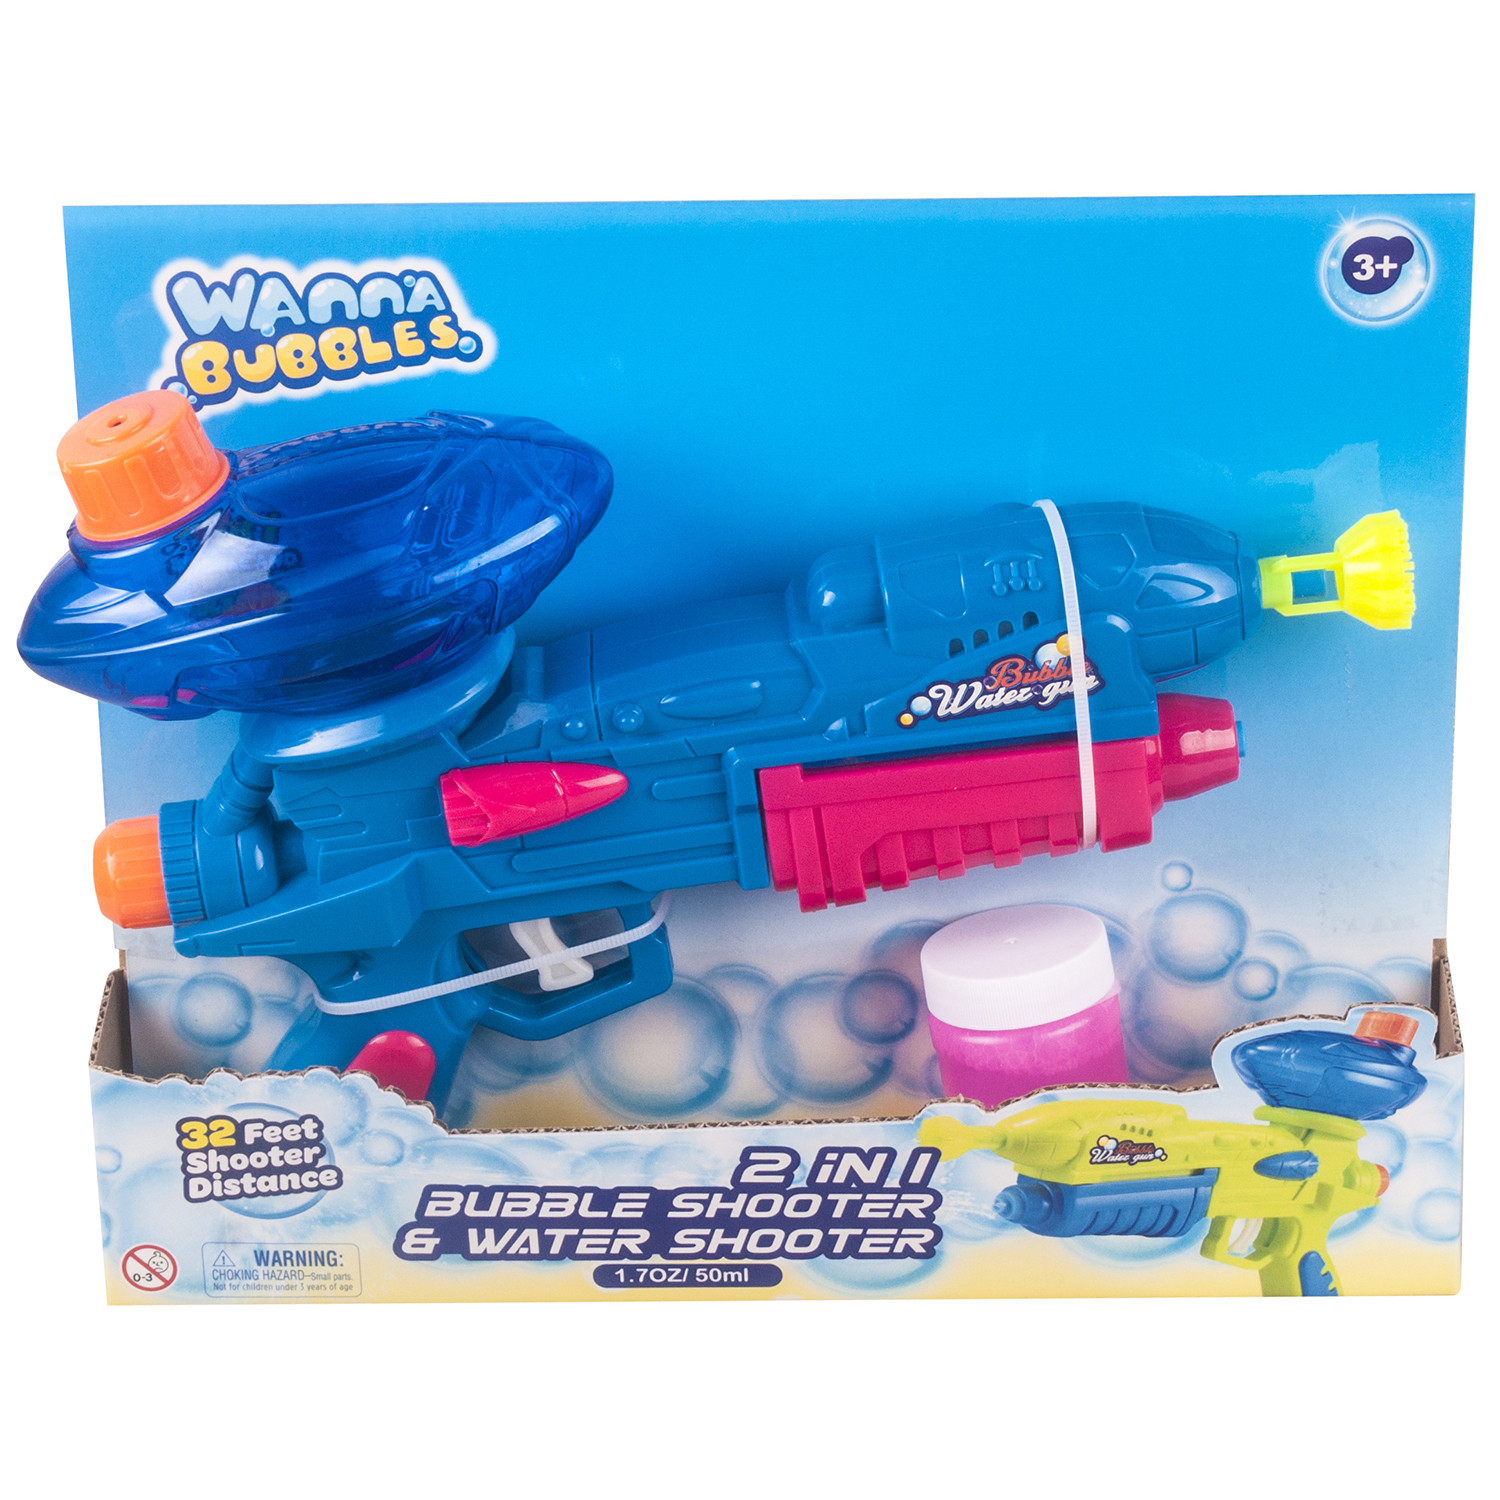 2-in-1 Bubble and Water Shooter Image 1